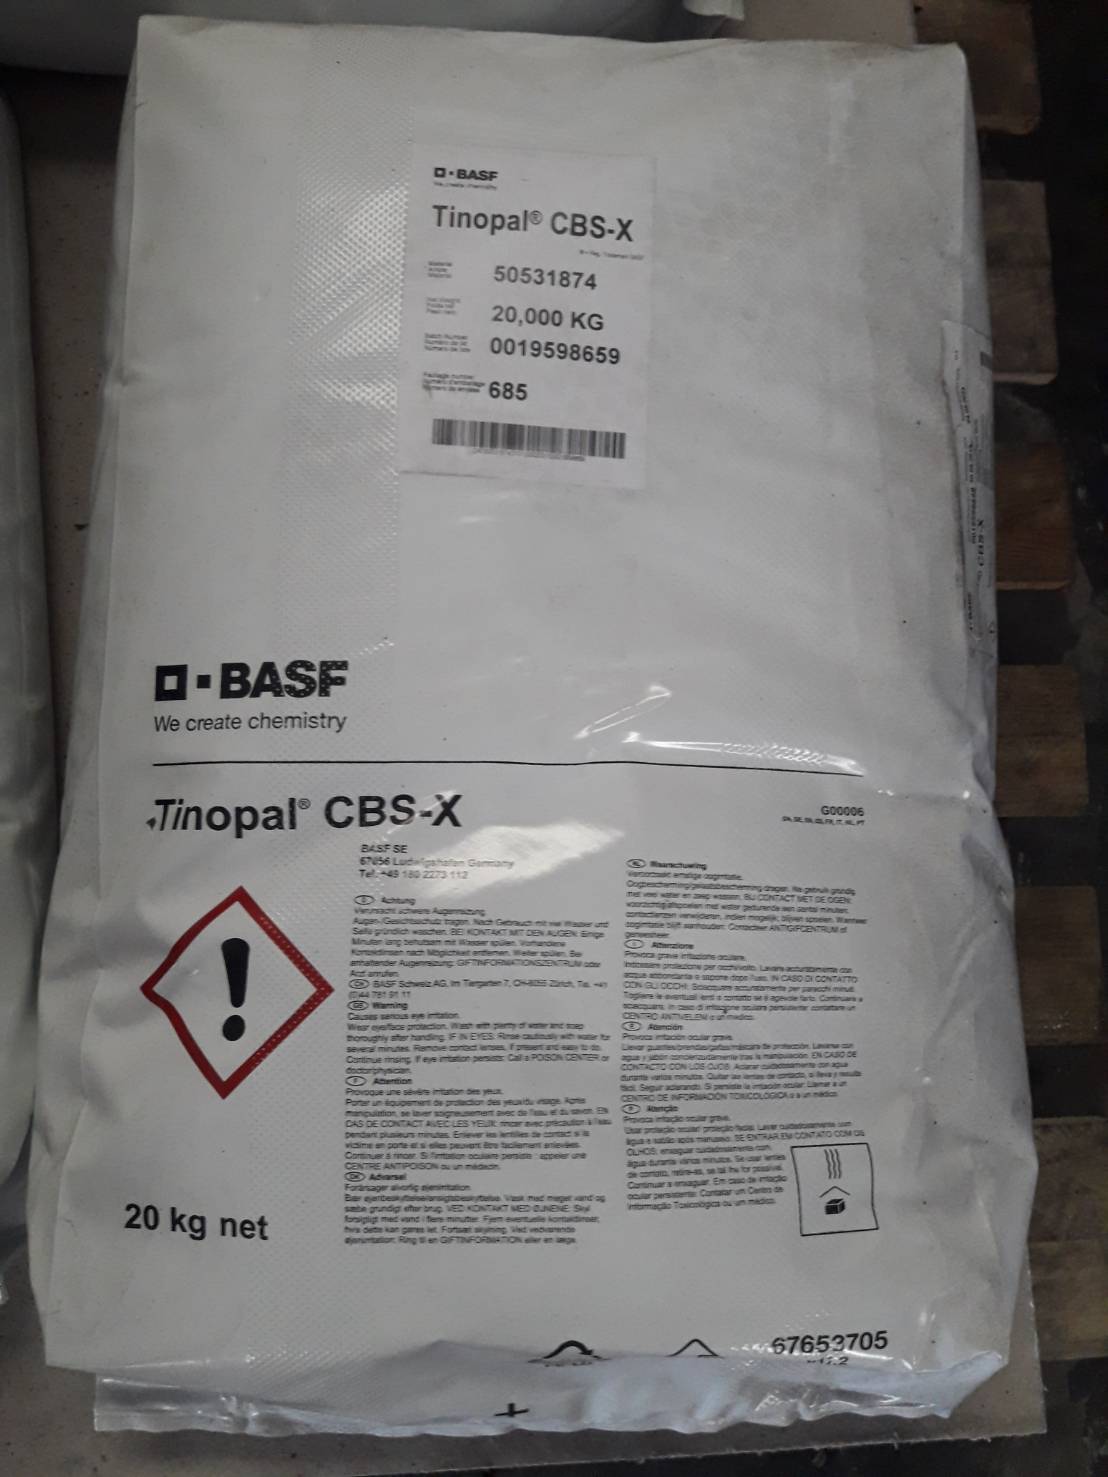 Tinopal Cbs X Thanant Chemical Co Ltd Has Become One Of The Leading Distributors Of Basf Germany Throughout Thailand By Sticking Closely To Its Fundamental Premises We Work Together With The Customers